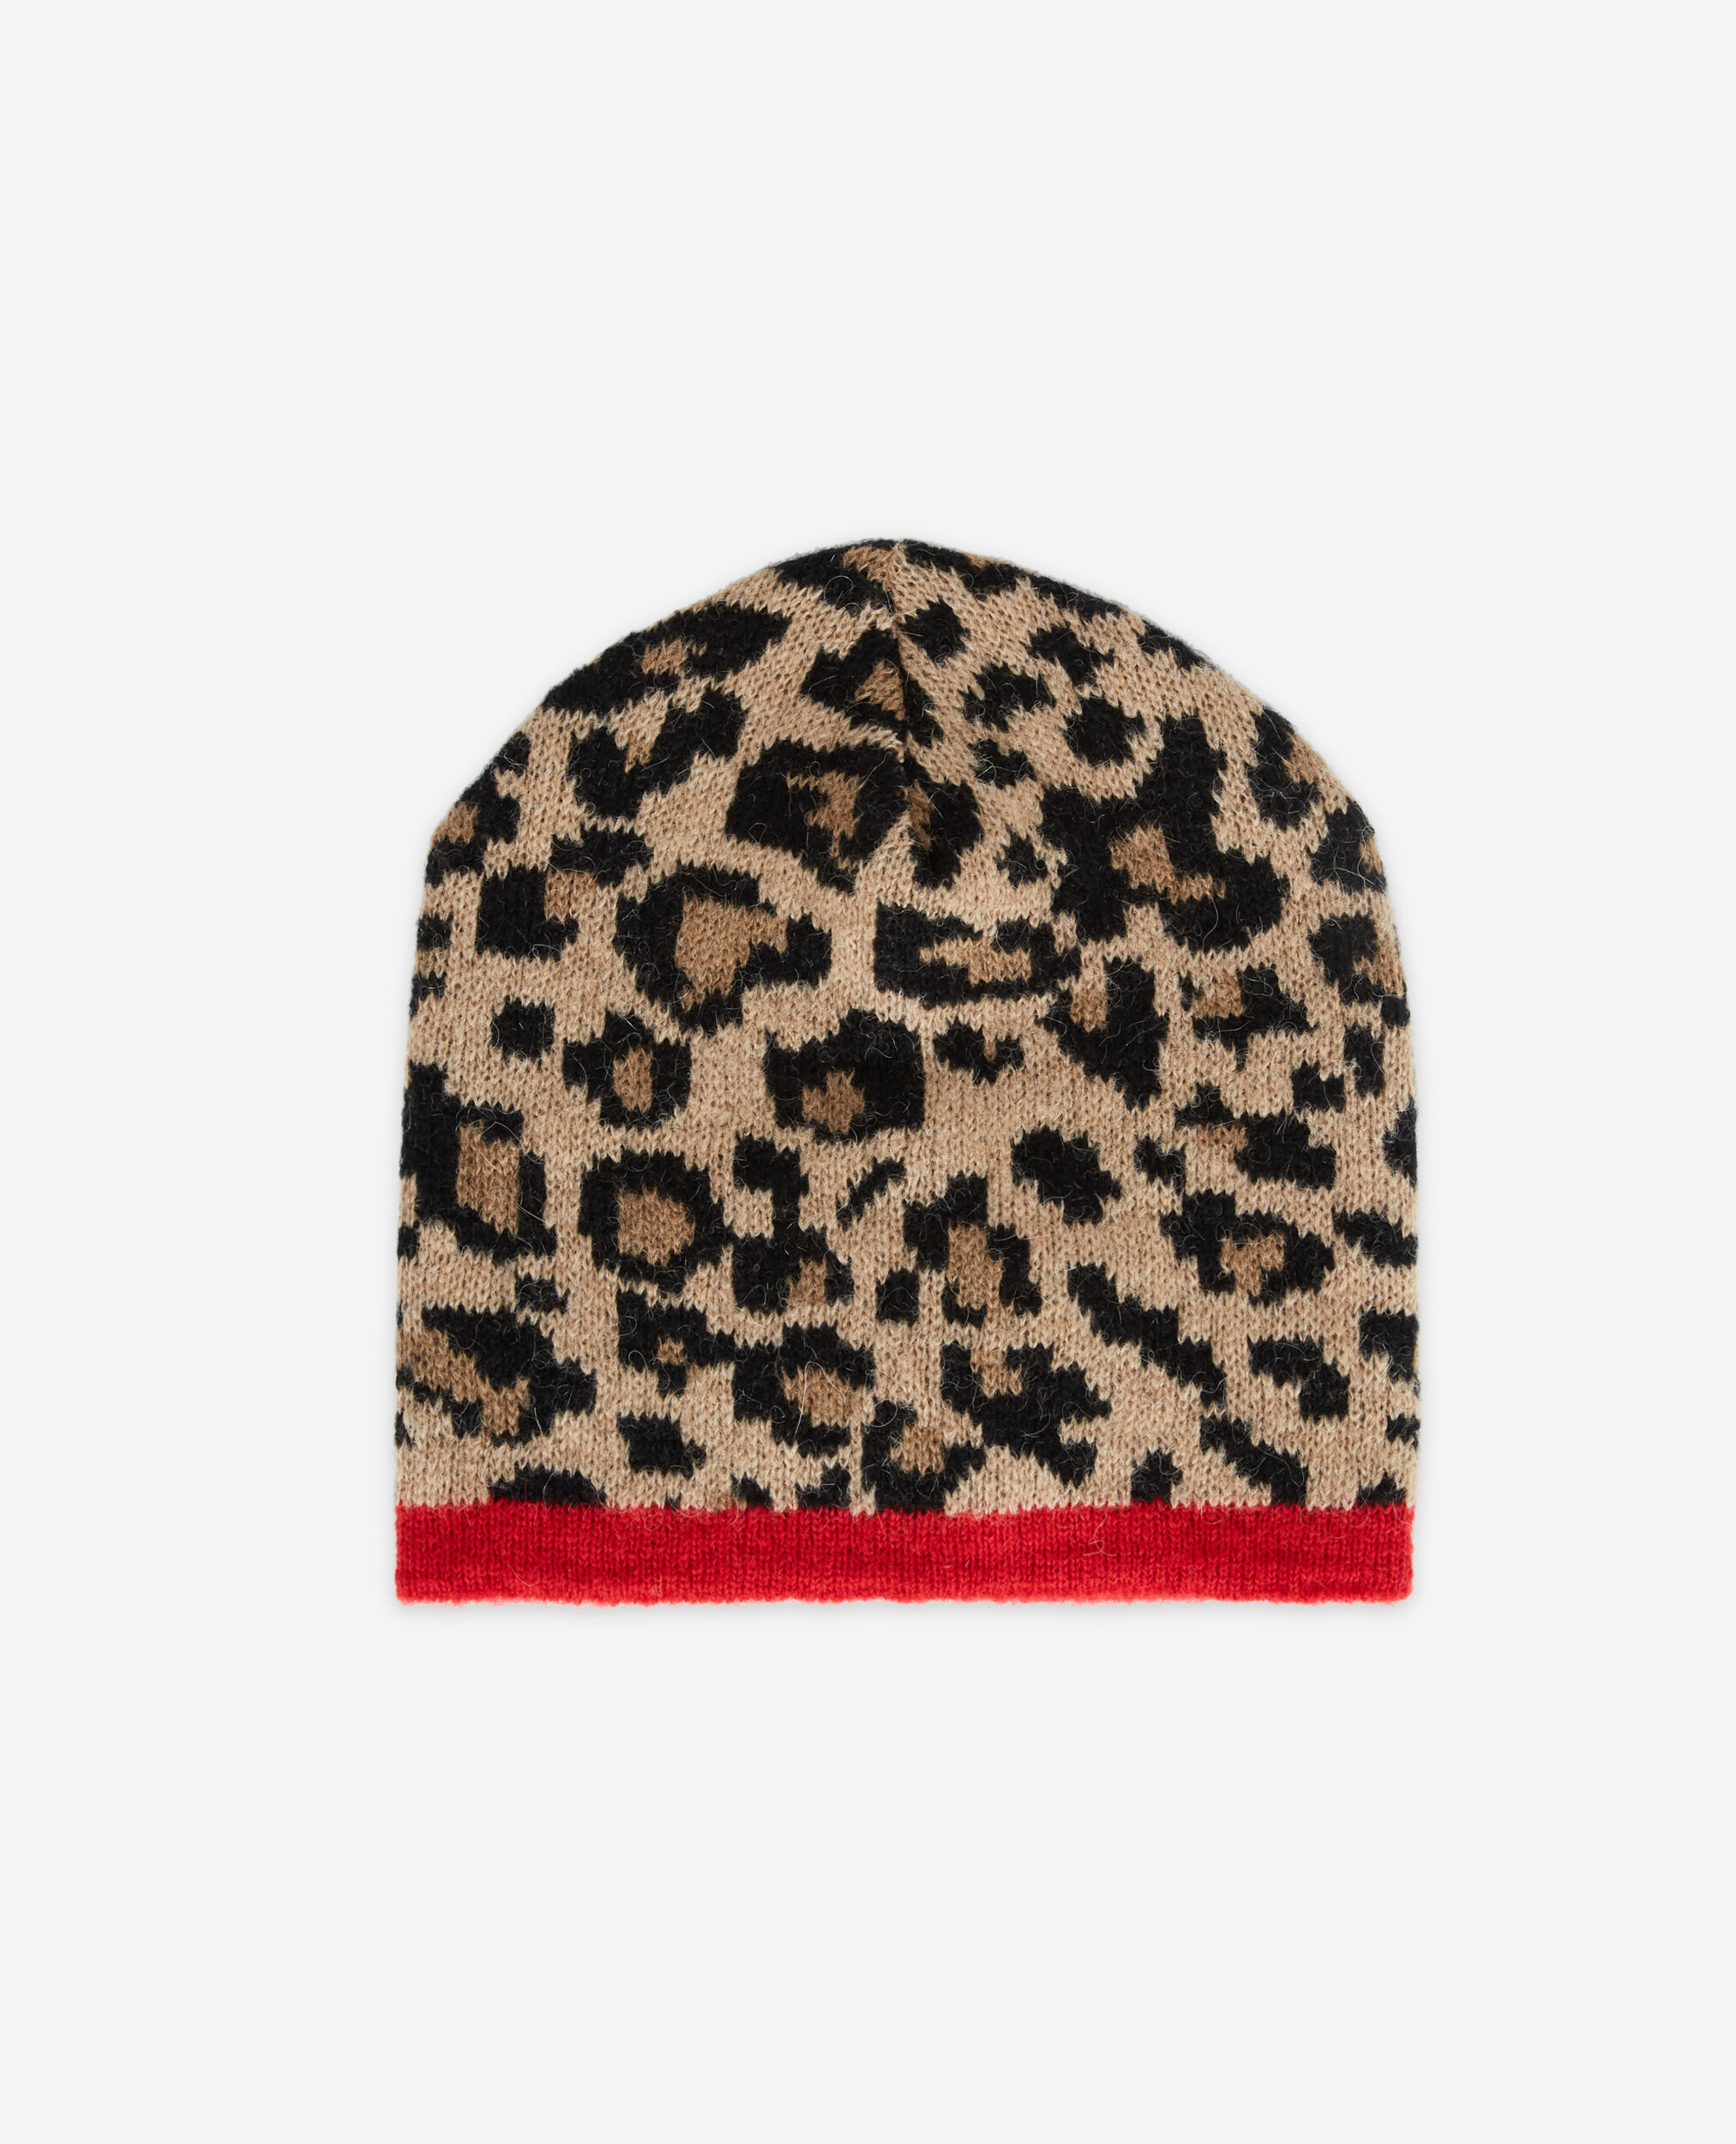 Leopard print wool beanie, LEOPARD, hi-res image number null